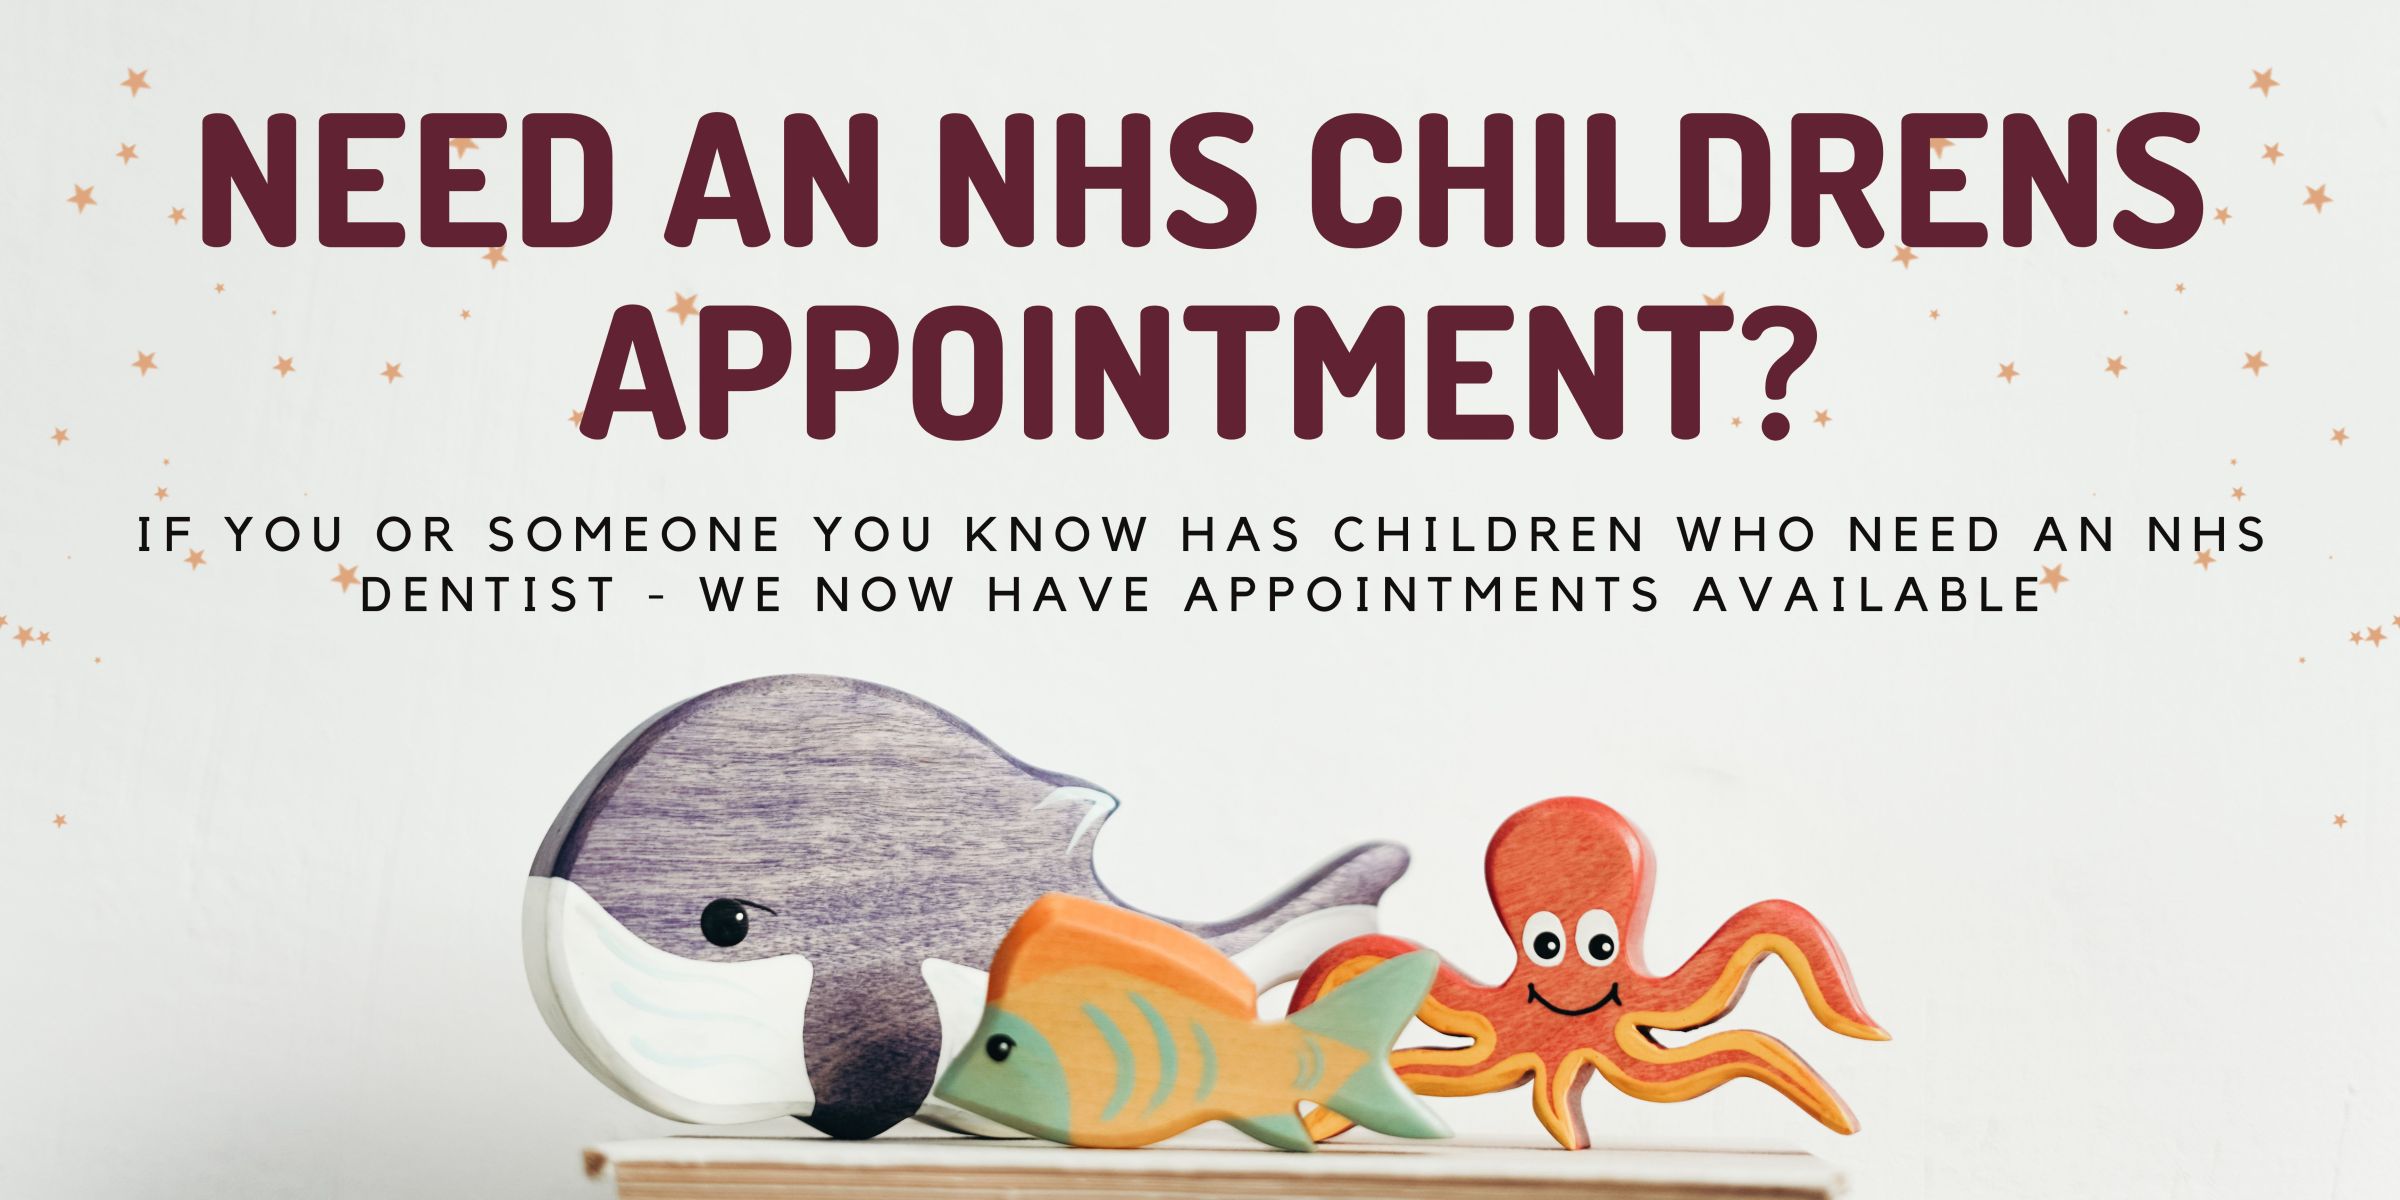 NHS Childrens appointments available